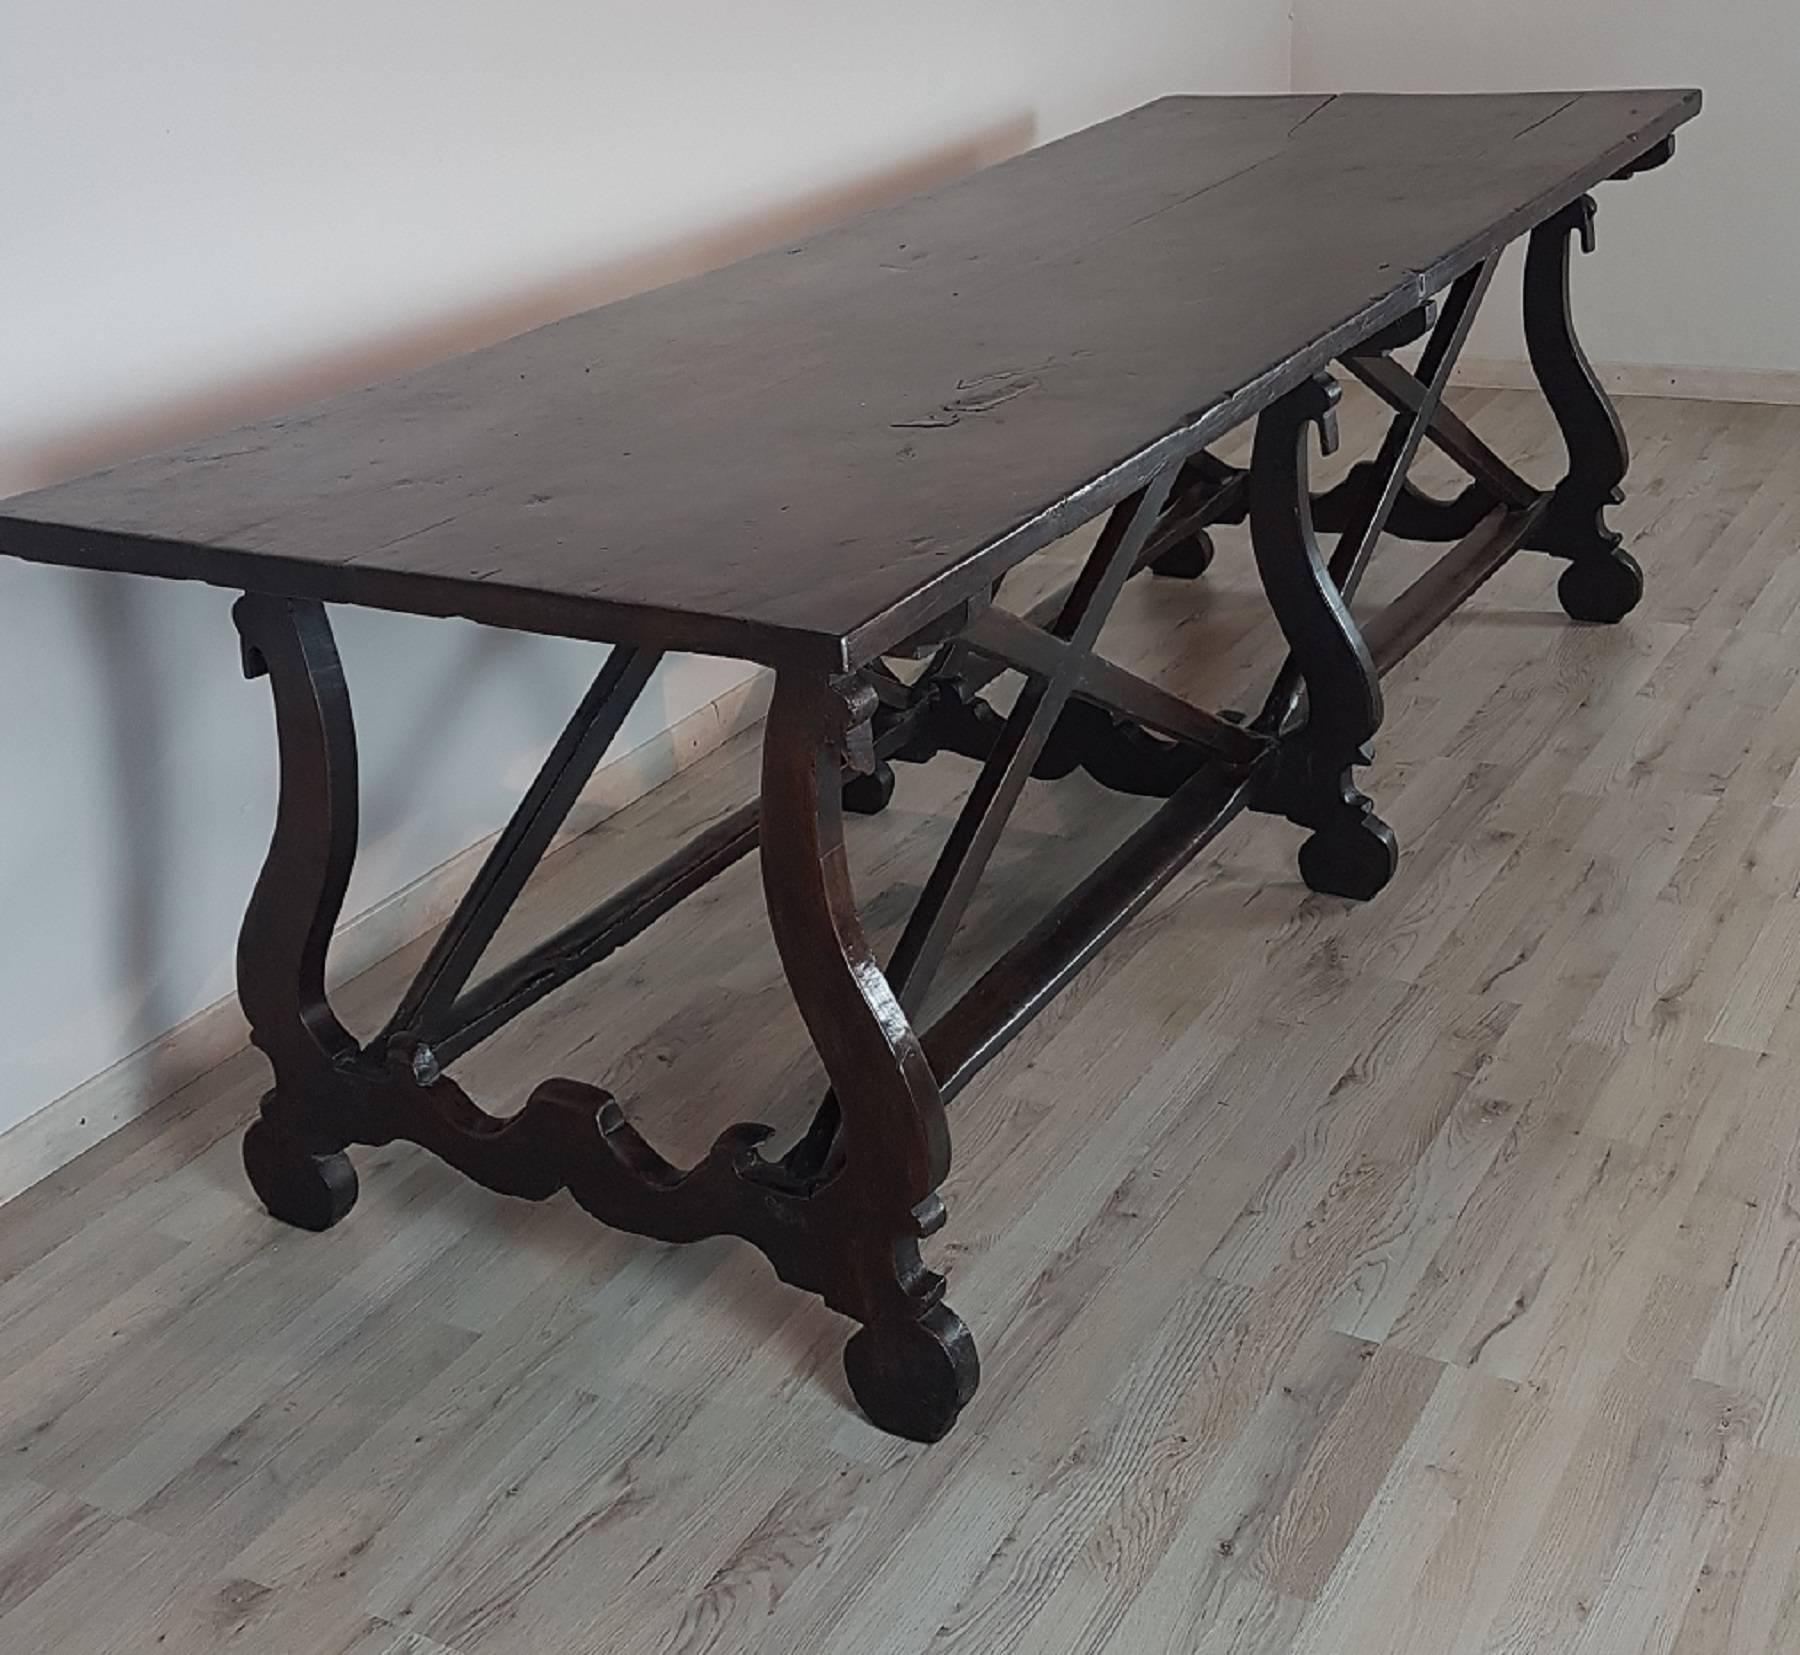 Antique table of great age unobtainable large size datable around the middle of the 17th century typical table said fratino used initially in the convent communities but many important examples such as that presented for sale were intended for large